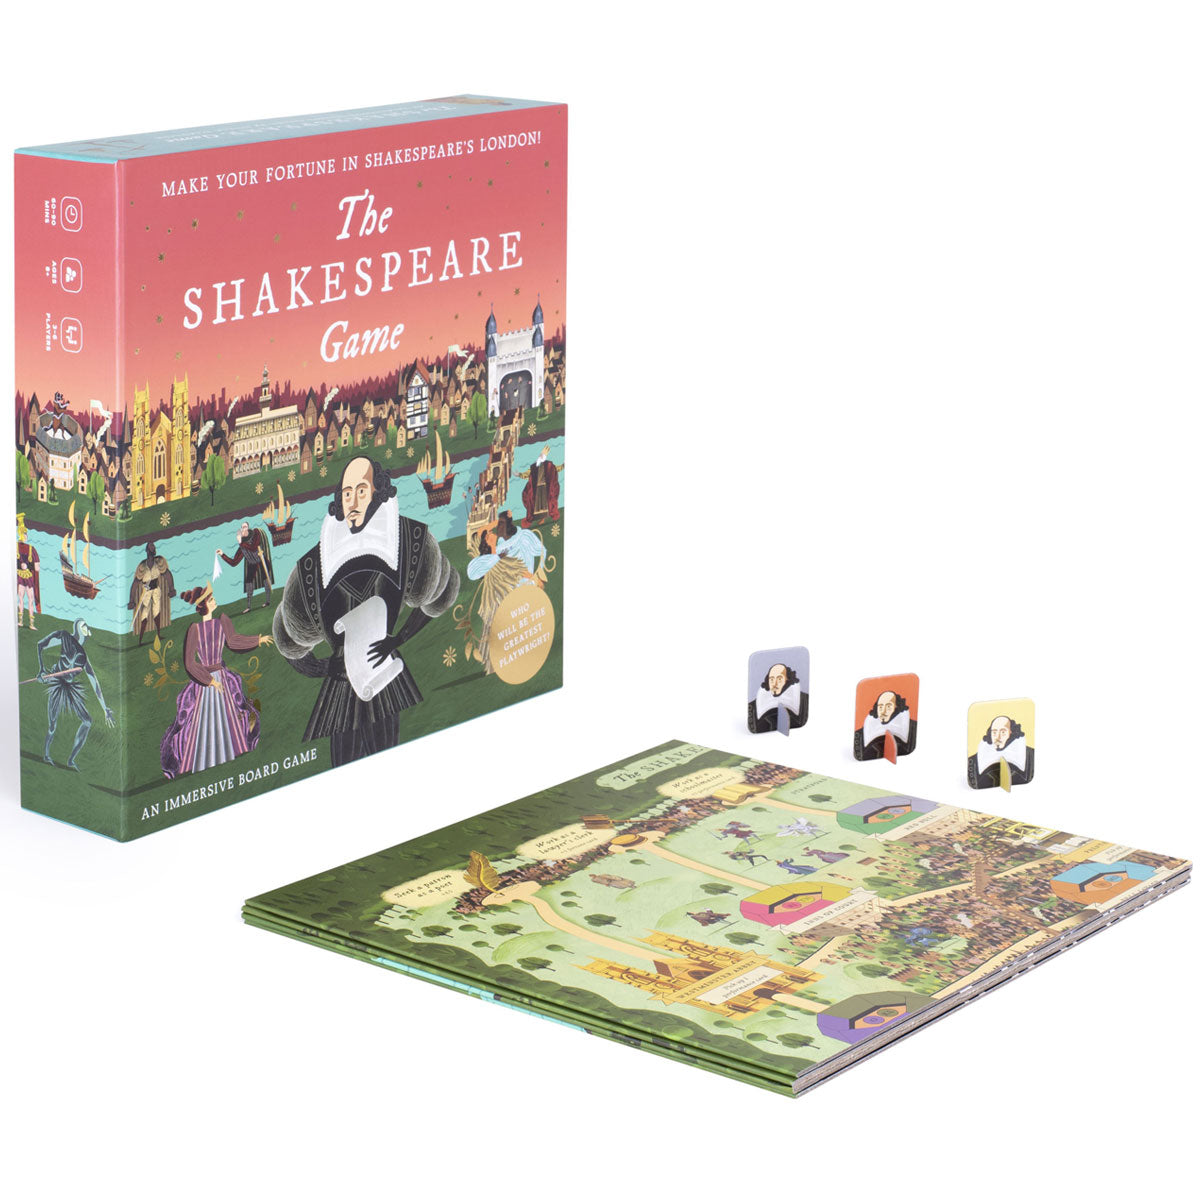 The Shakespeare Game: An Immersive Board Game